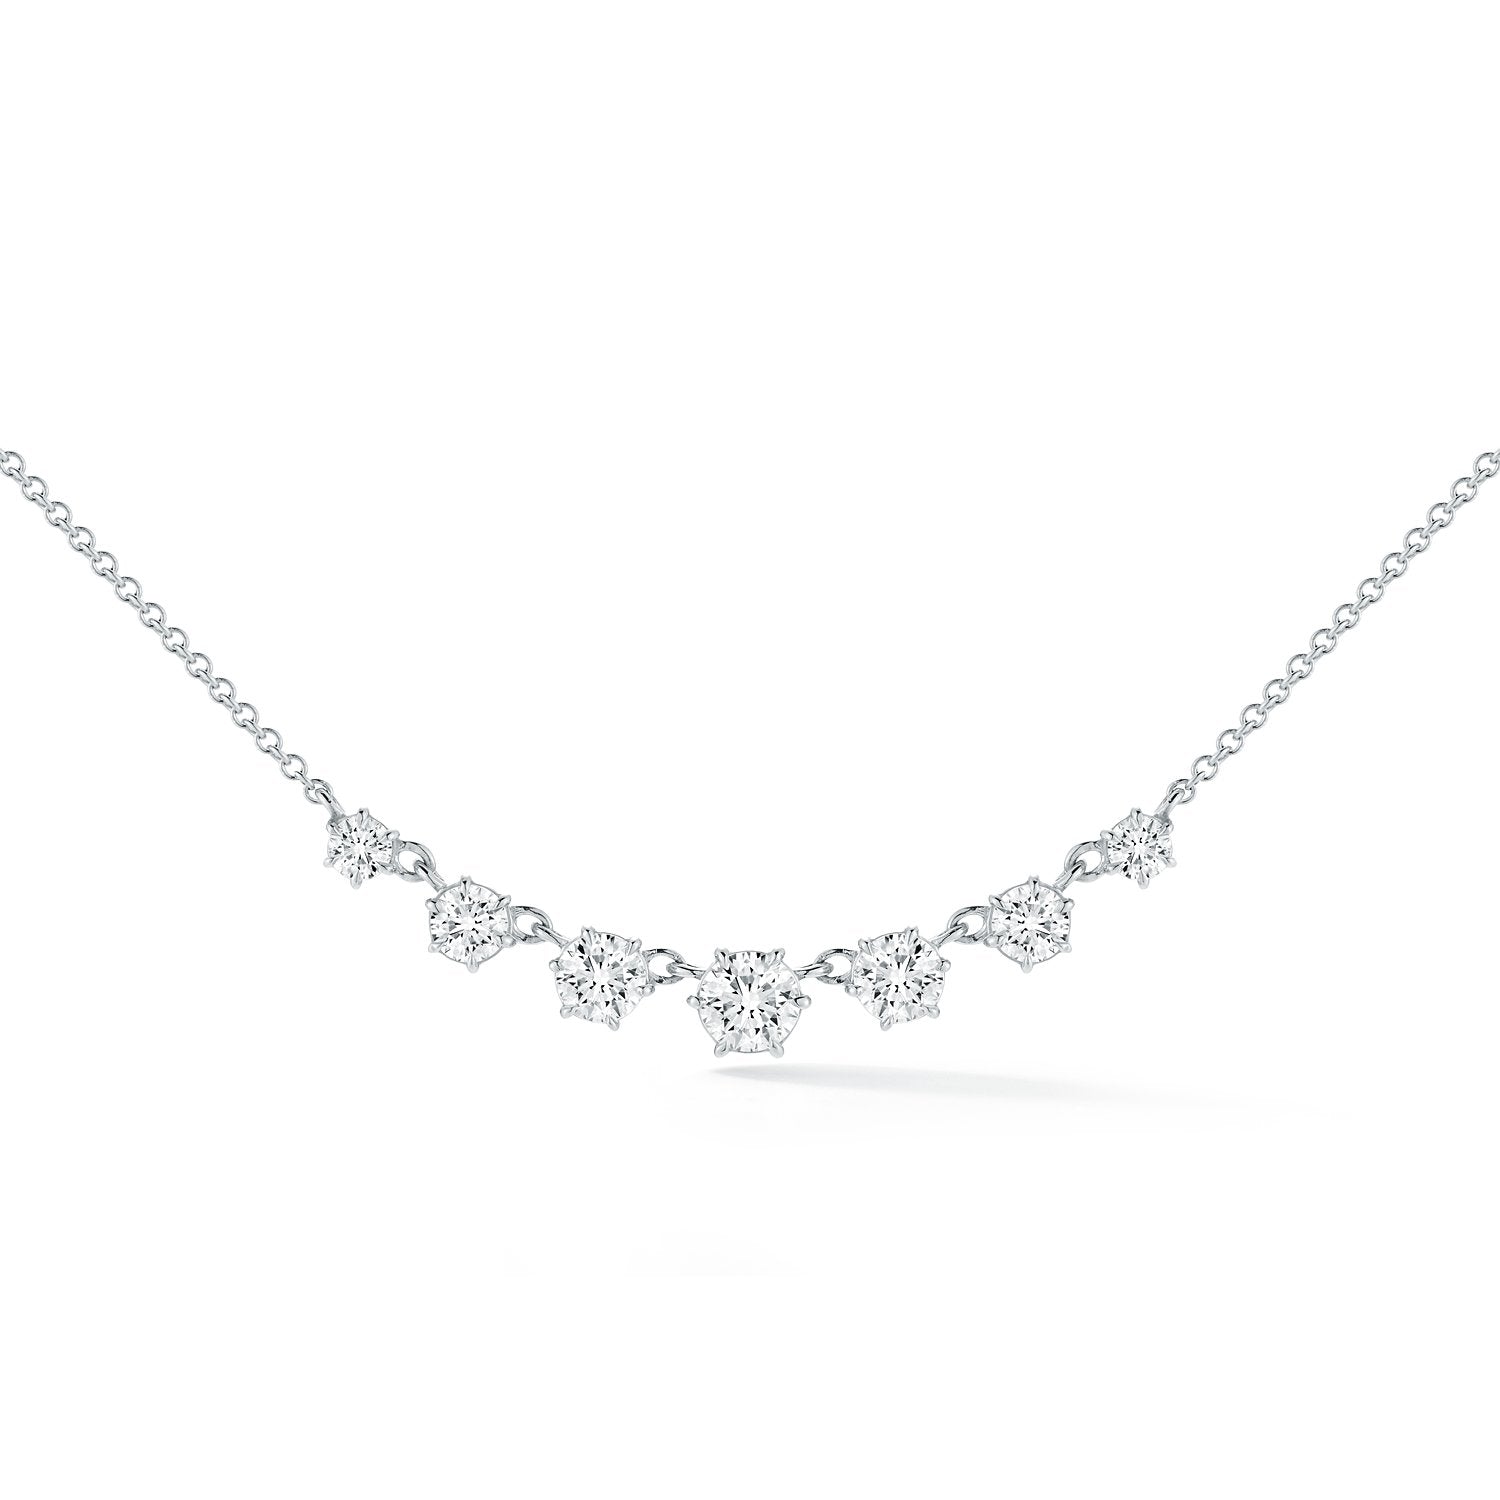 Small Penelope Necklace in 18K White Gold